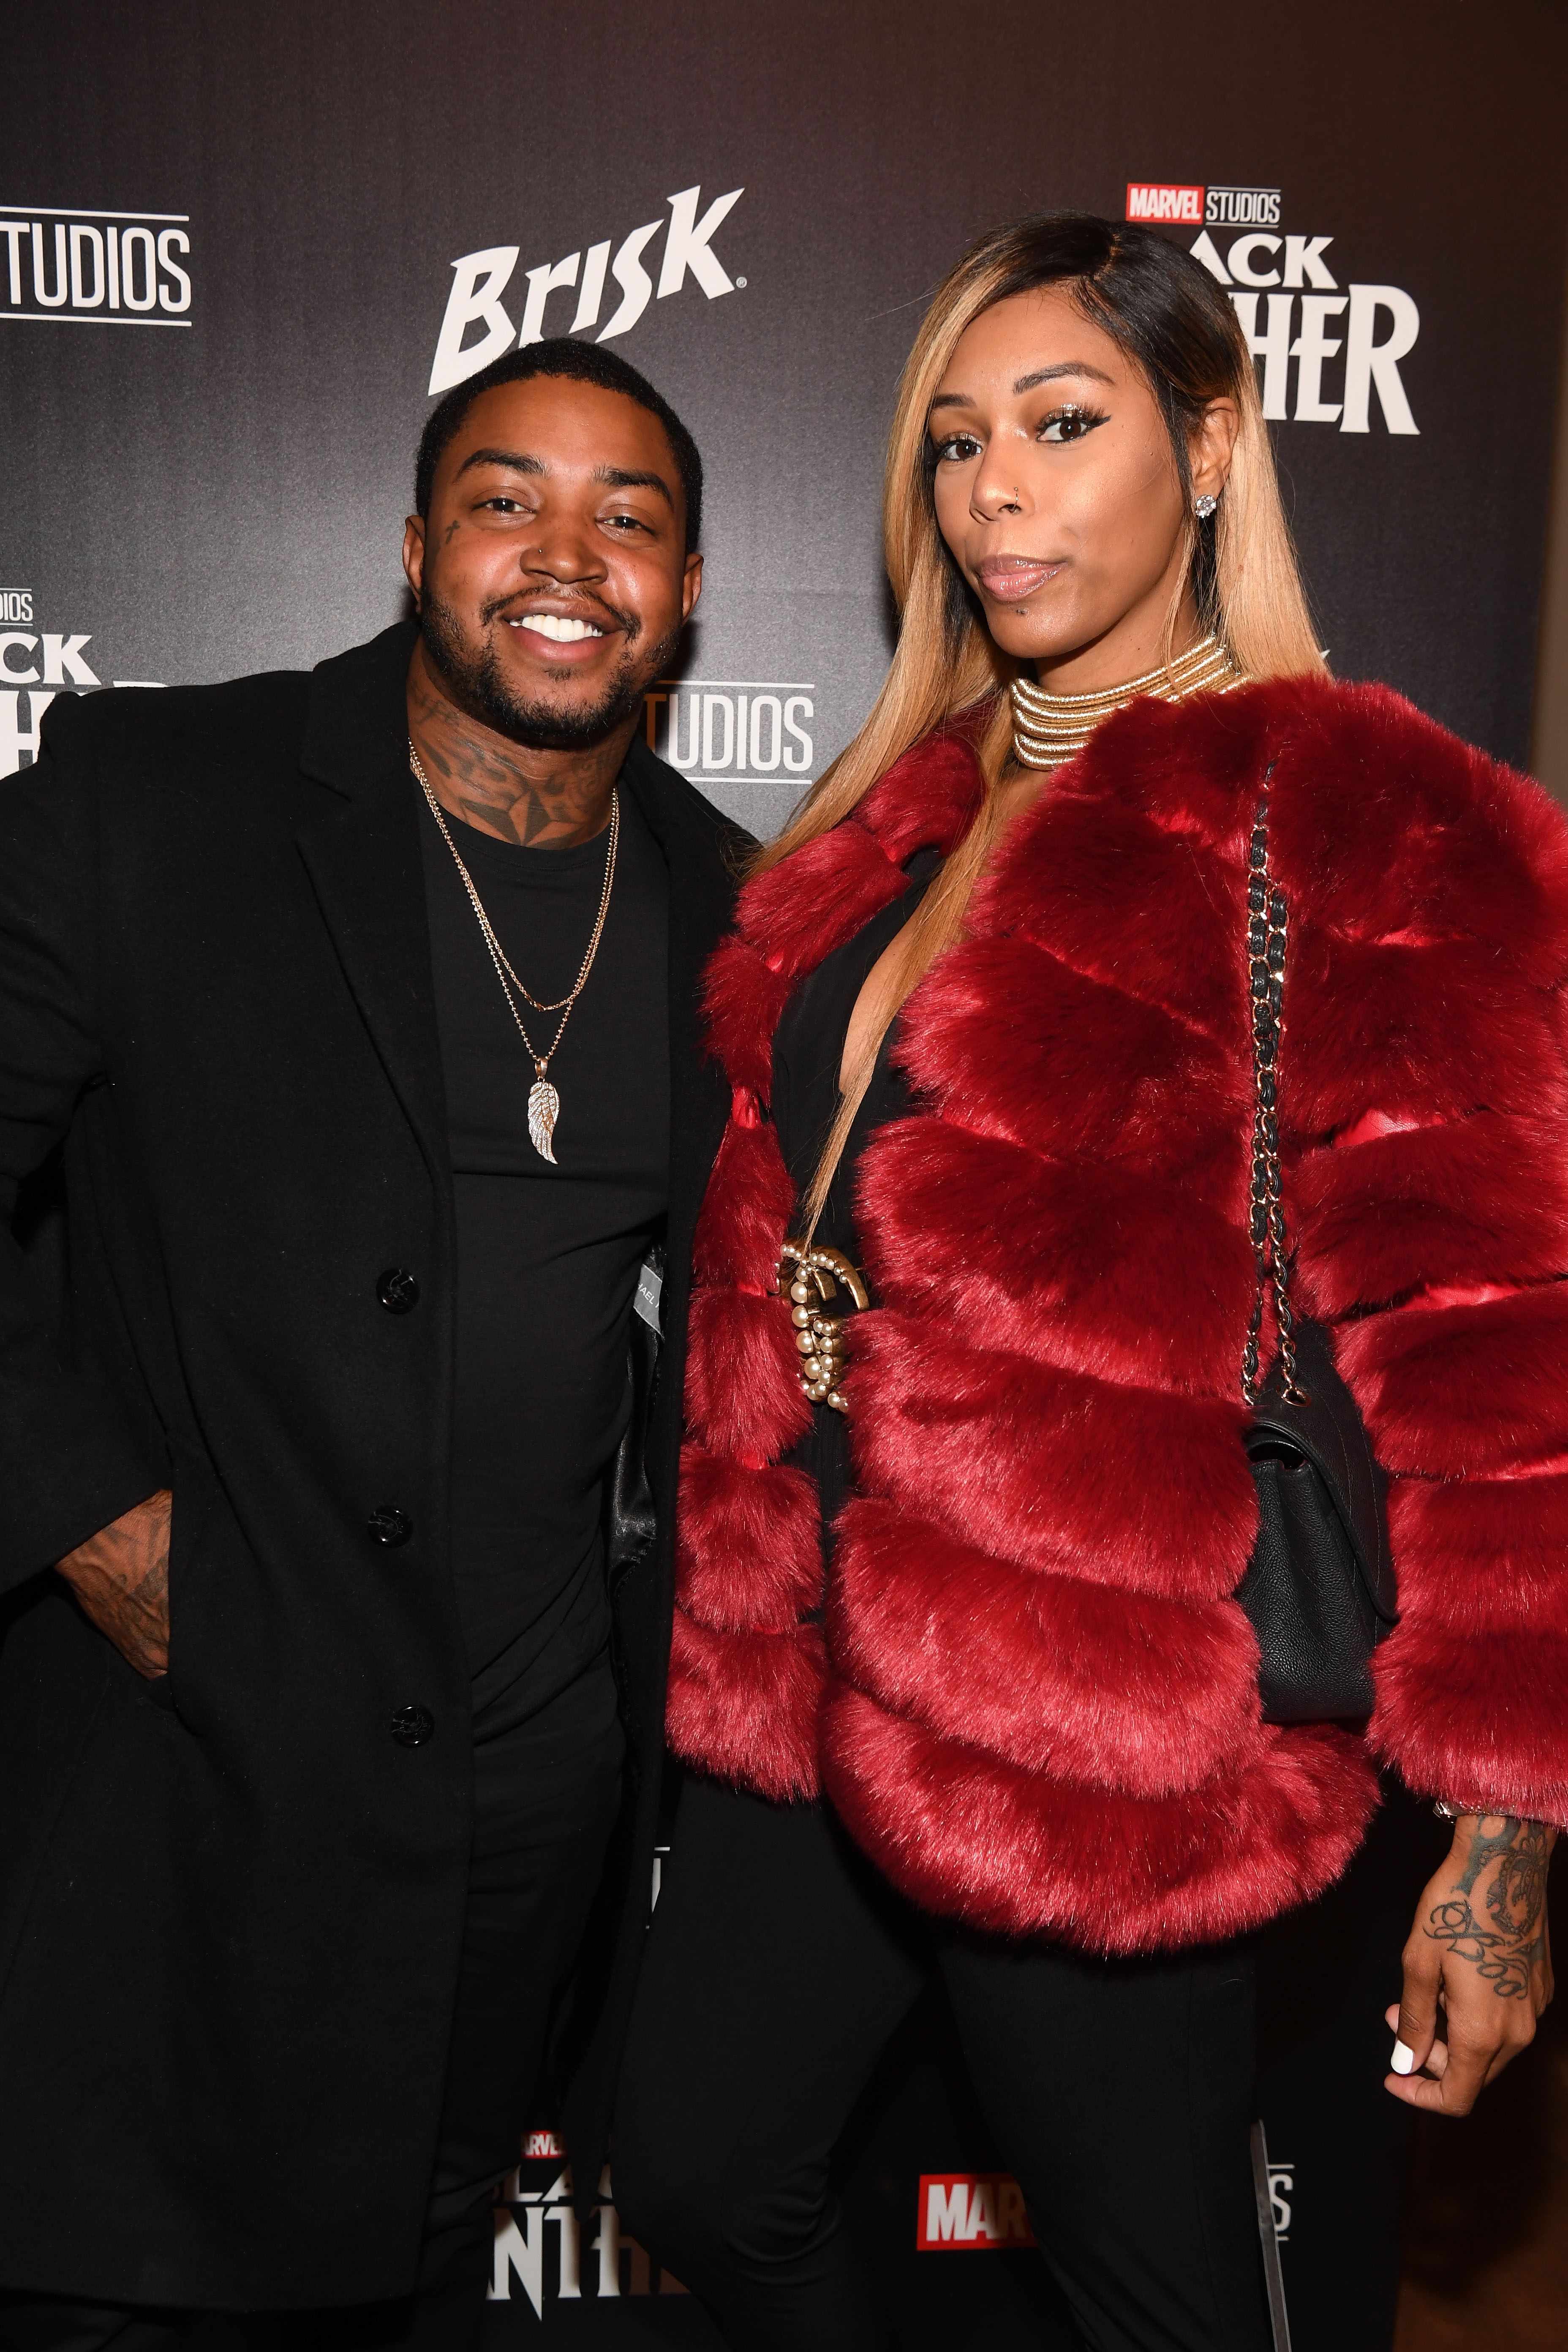 Rapper Lil Scrappy and Adiz 'Bambi' Benson at "Black Panther" Advanced Screening & Panel Discussion presented by Brisk at SCADshow on February 14, 2018 | Photo: Getty Images